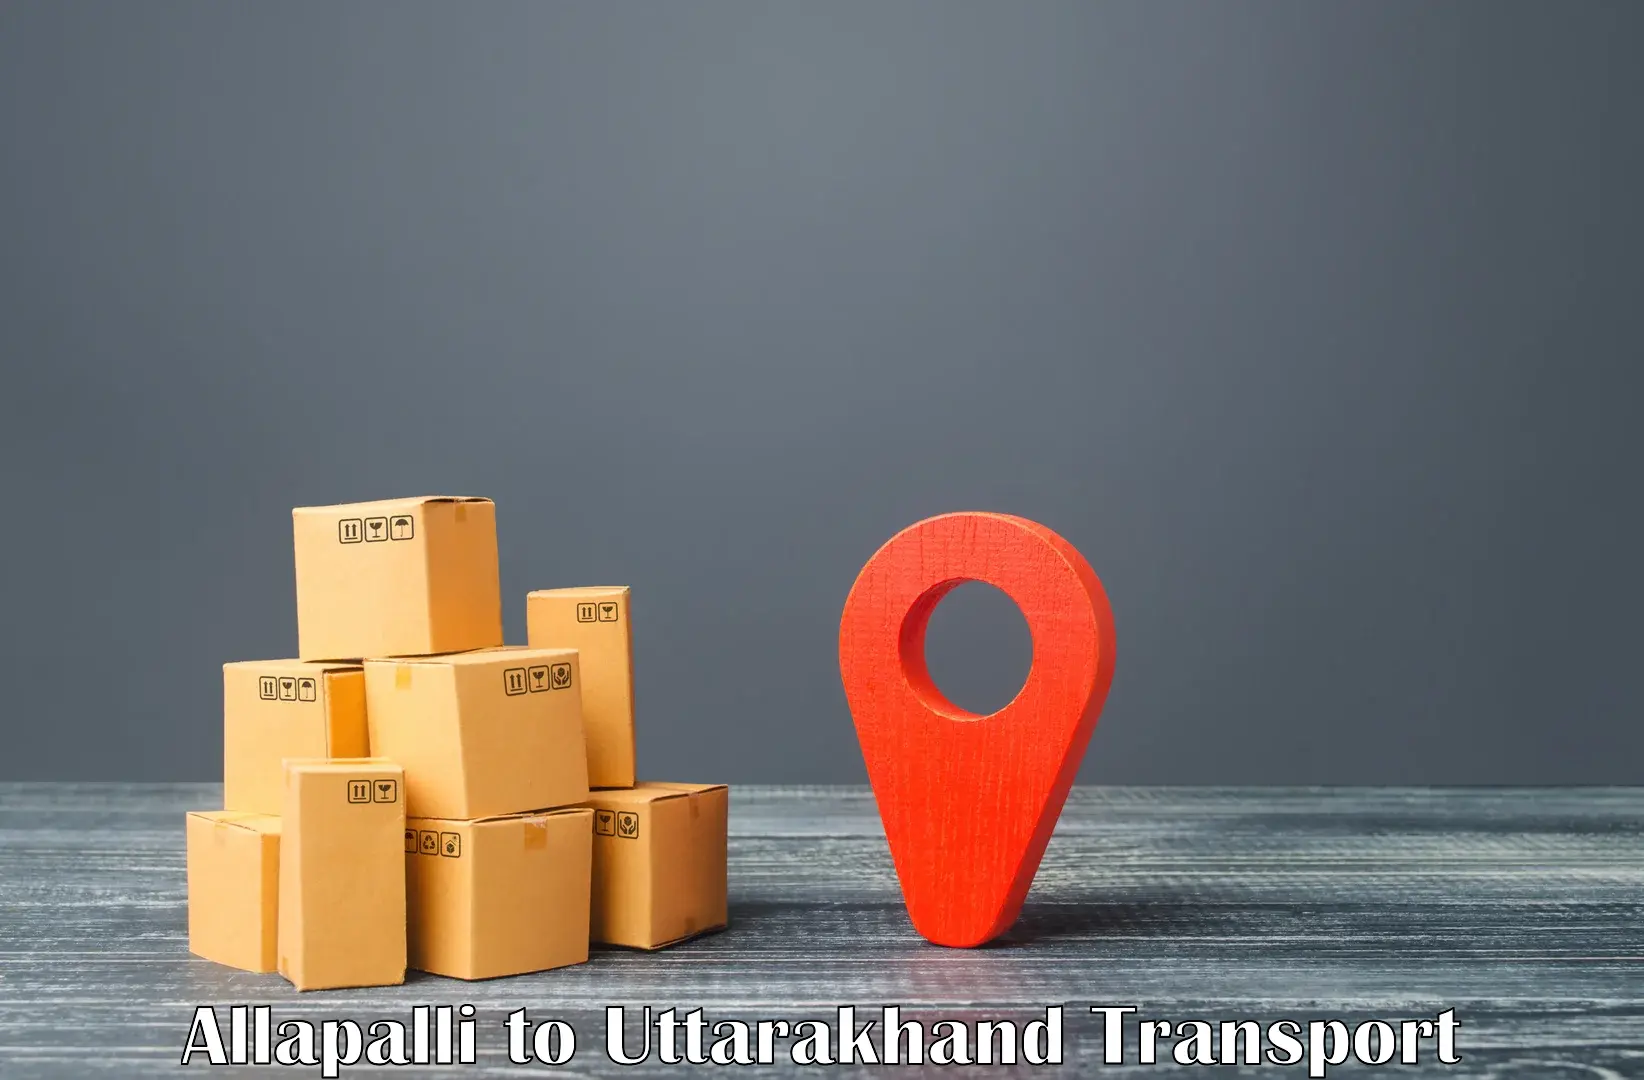 Vehicle transport services in Allapalli to Doiwala